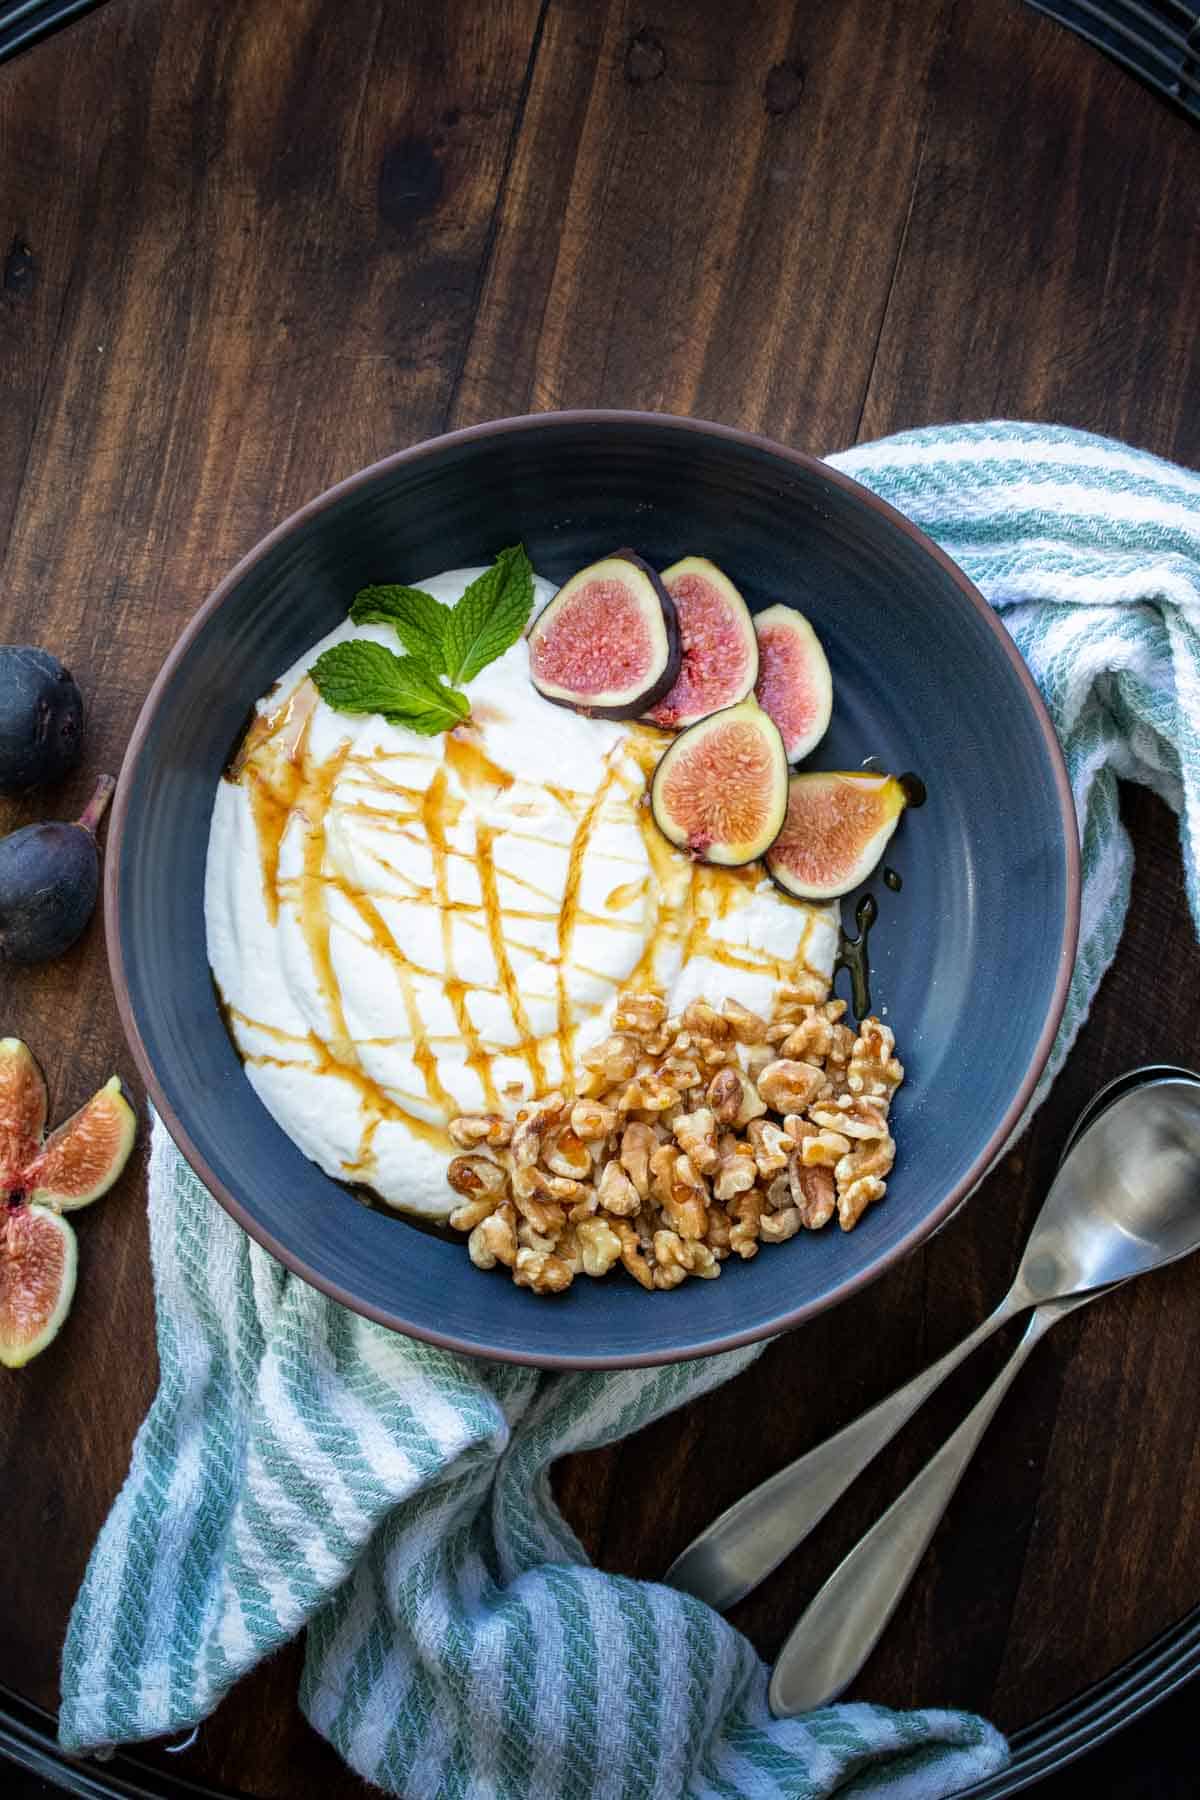 Dark grey blue bowl with yogurt inside topped with figs and walnuts